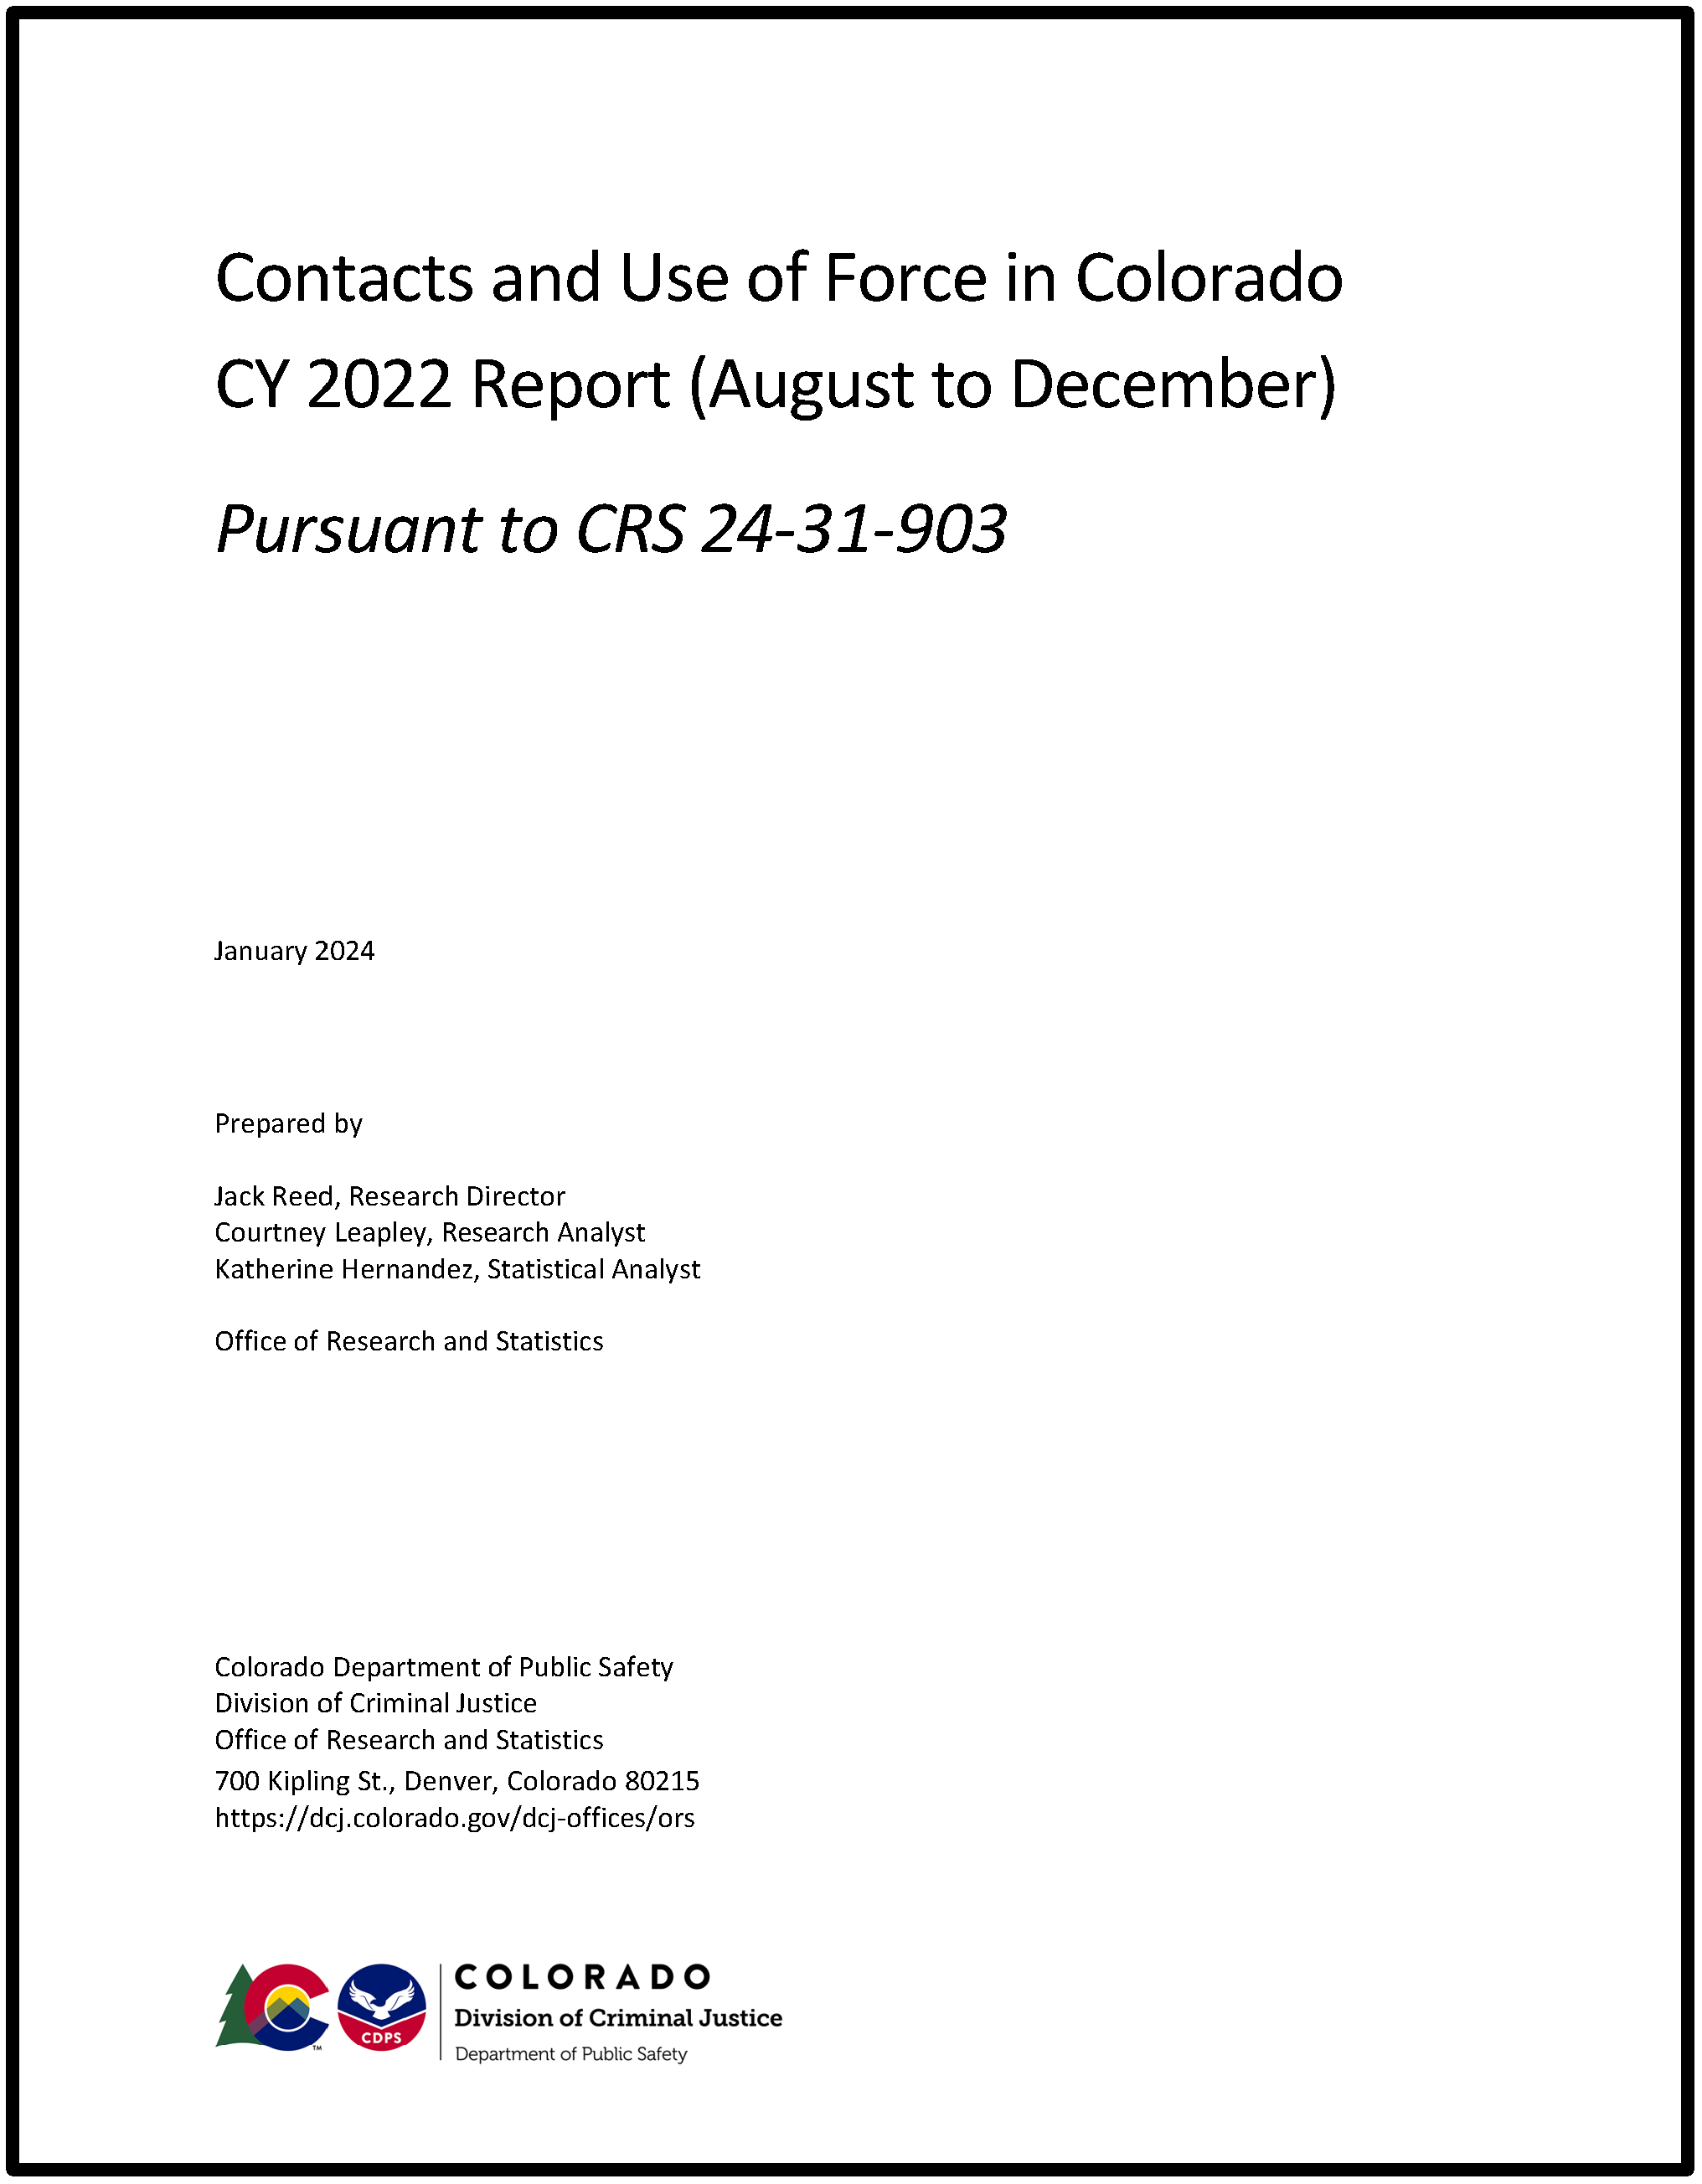 Report on Contacts and Use of Force in Colorado (January 2024)